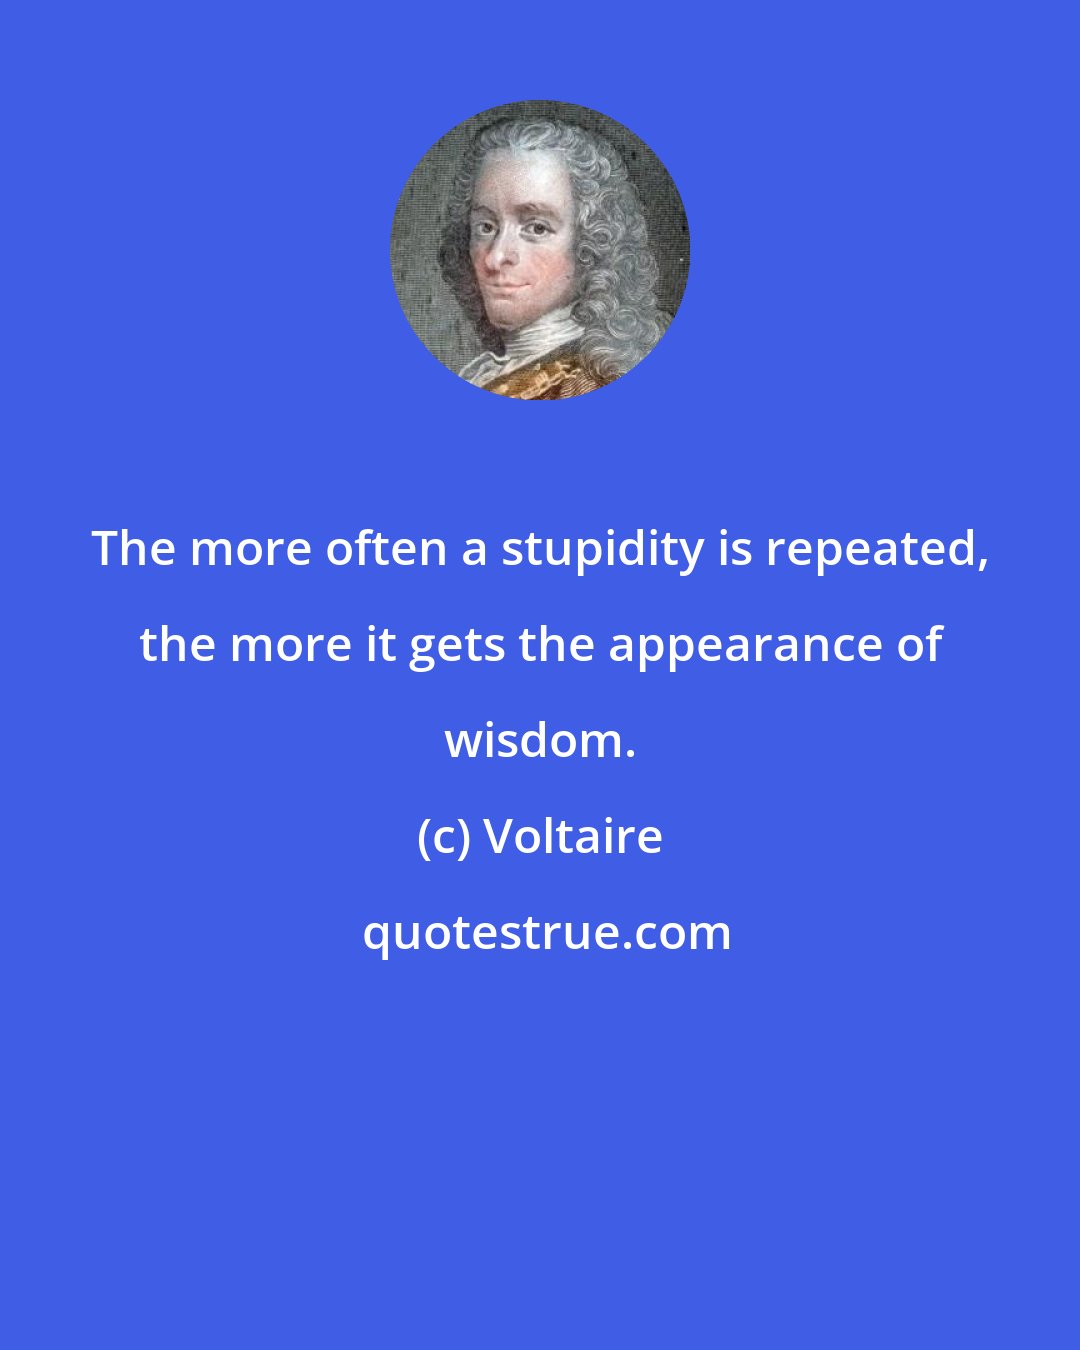 Voltaire: The more often a stupidity is repeated, the more it gets the appearance of wisdom.